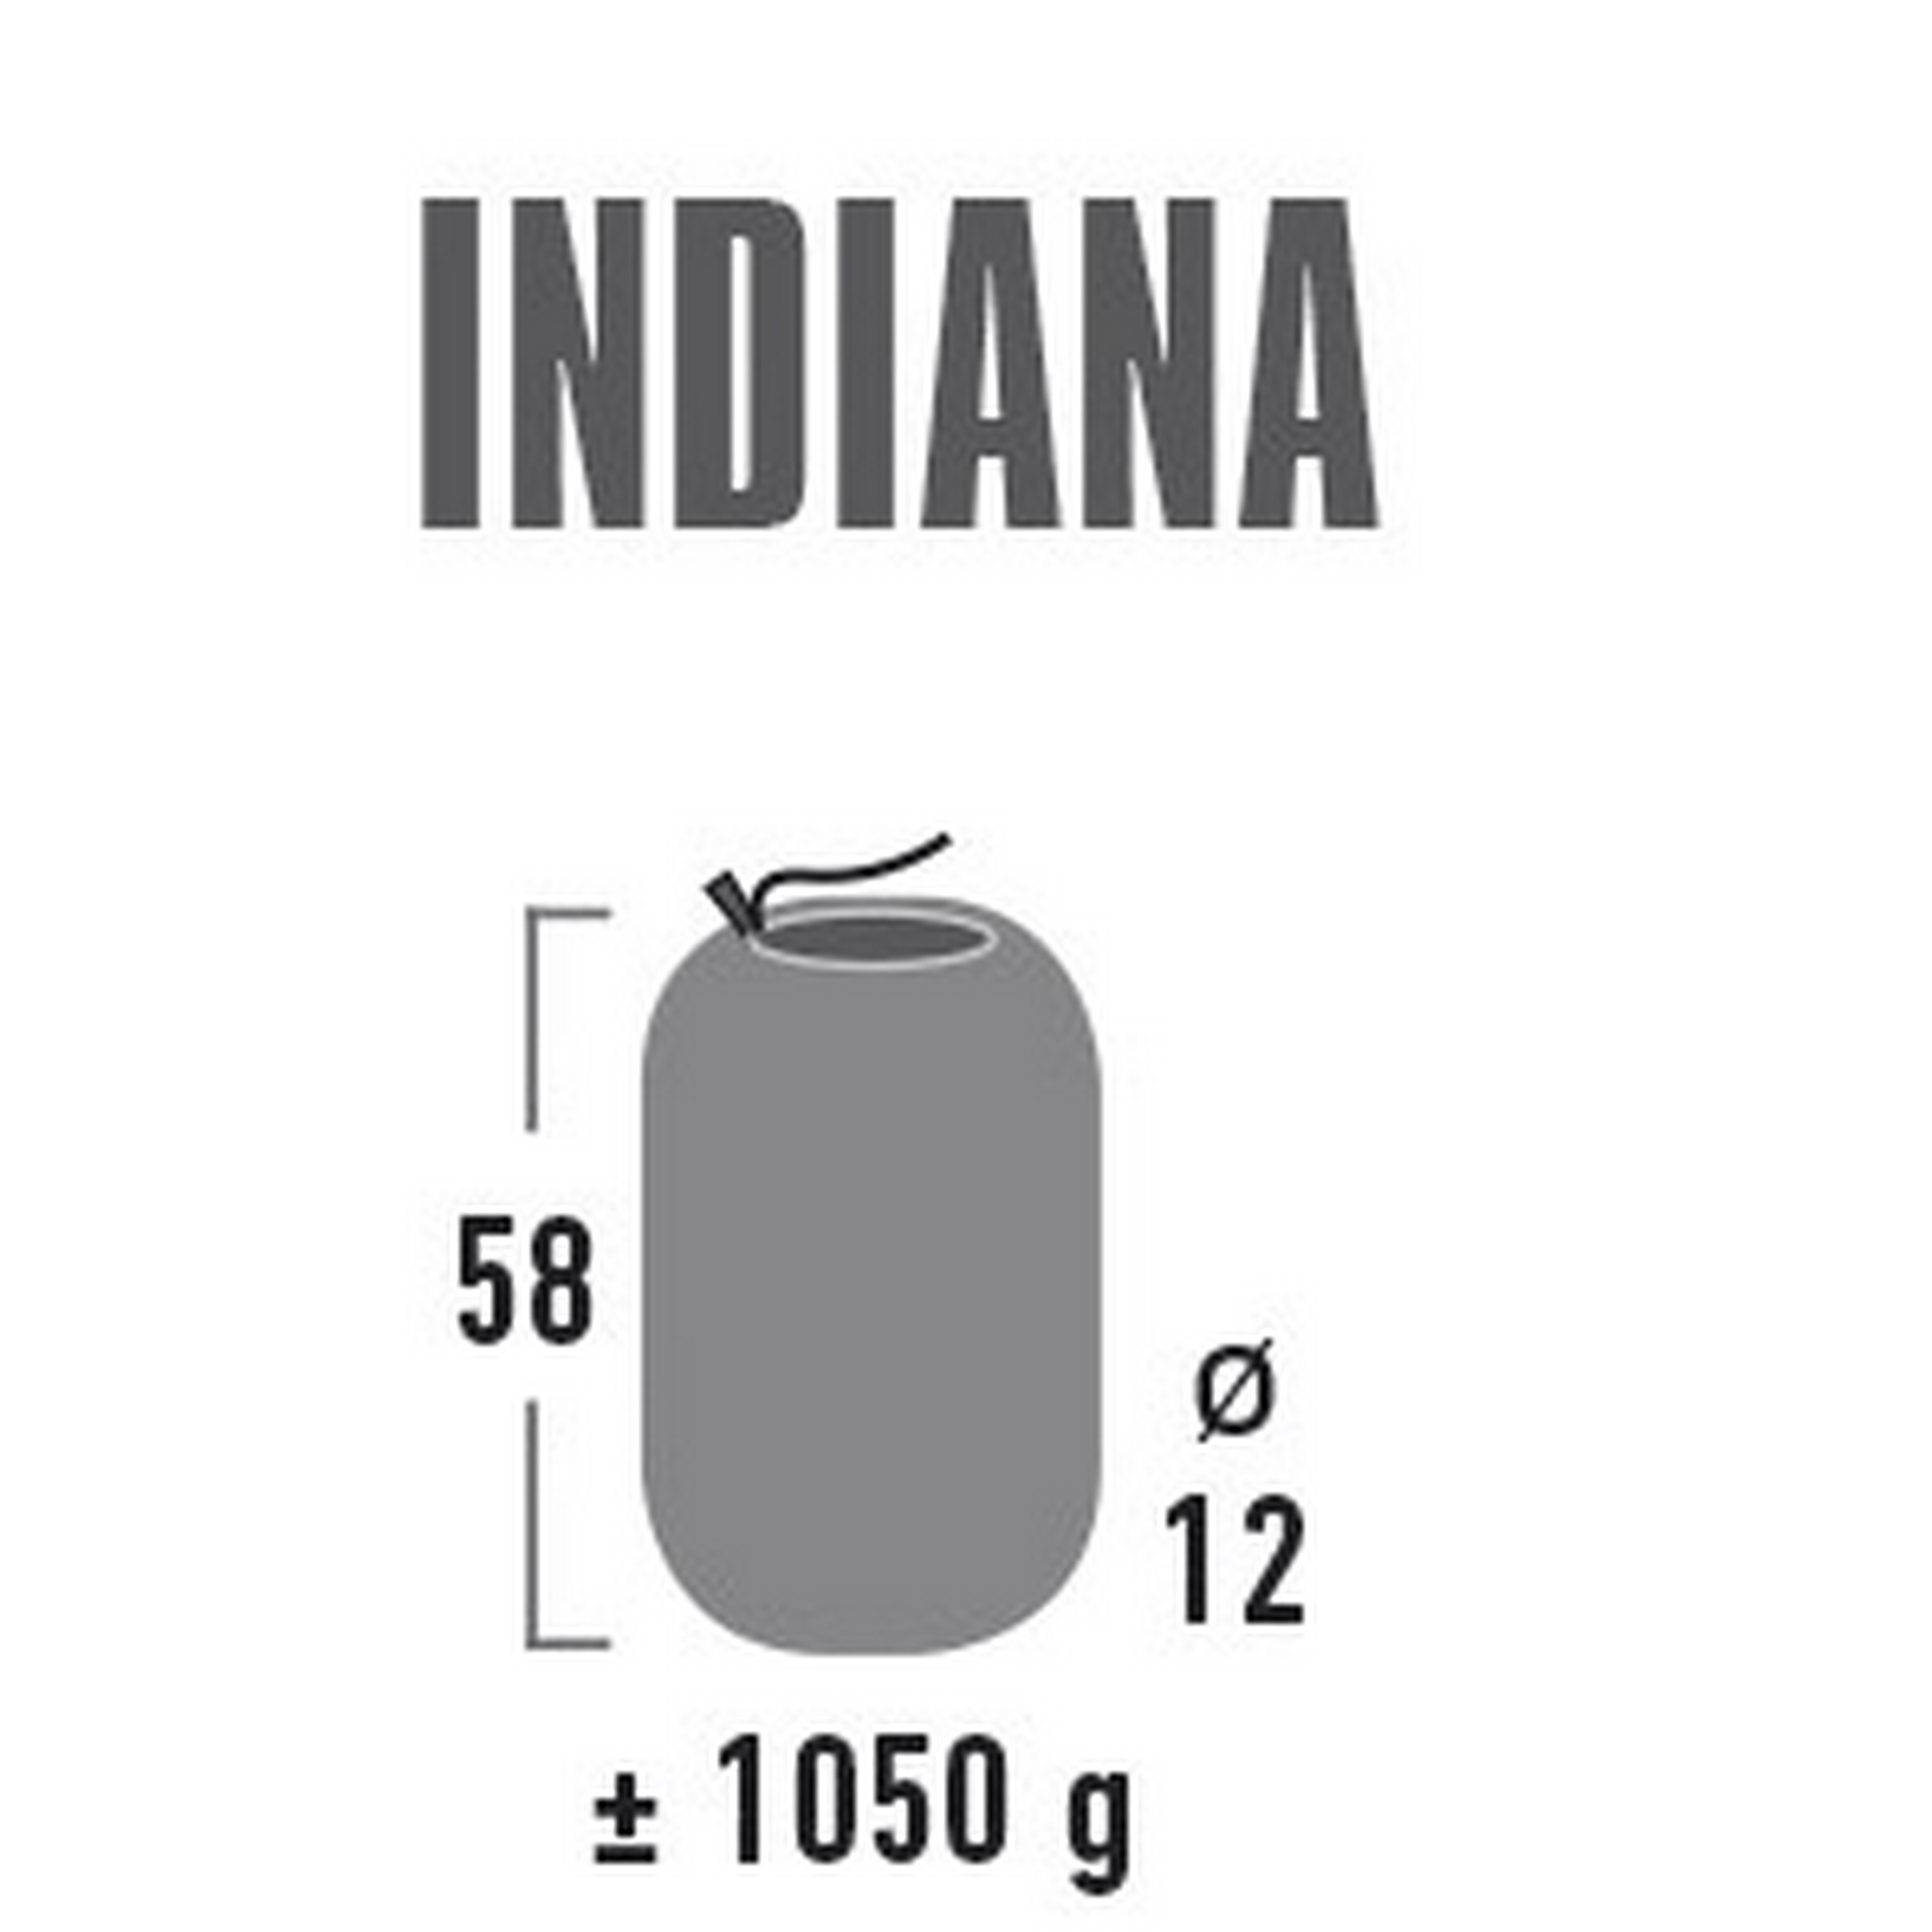 Matte Indiana + product picture